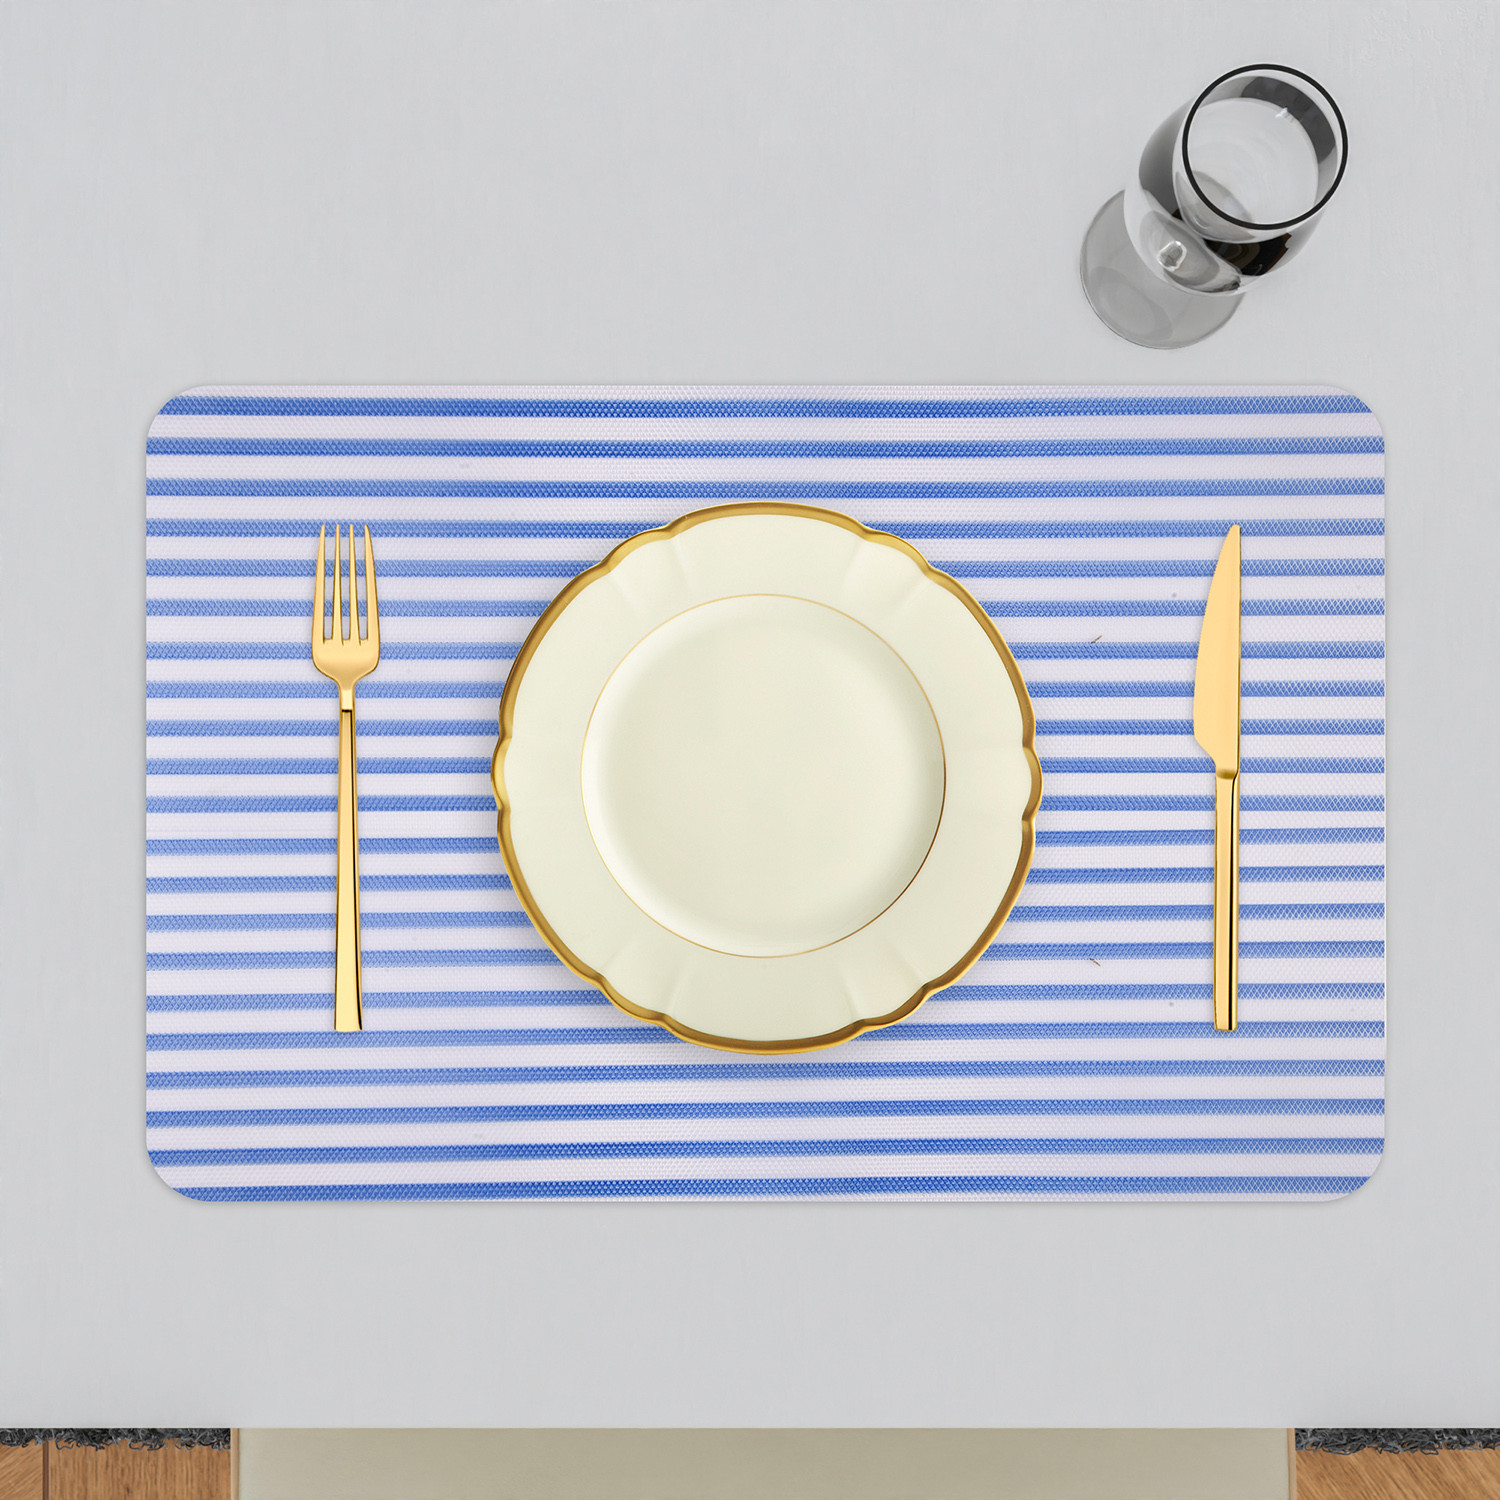 Kuber Industries Placemat | Placemats for Dining Room | Anti-Slip Table Mat Set | Placemats for Kitchen Table | Dining Table Placemats | Lining-Design Placemat | 6 Piece Set | Blue